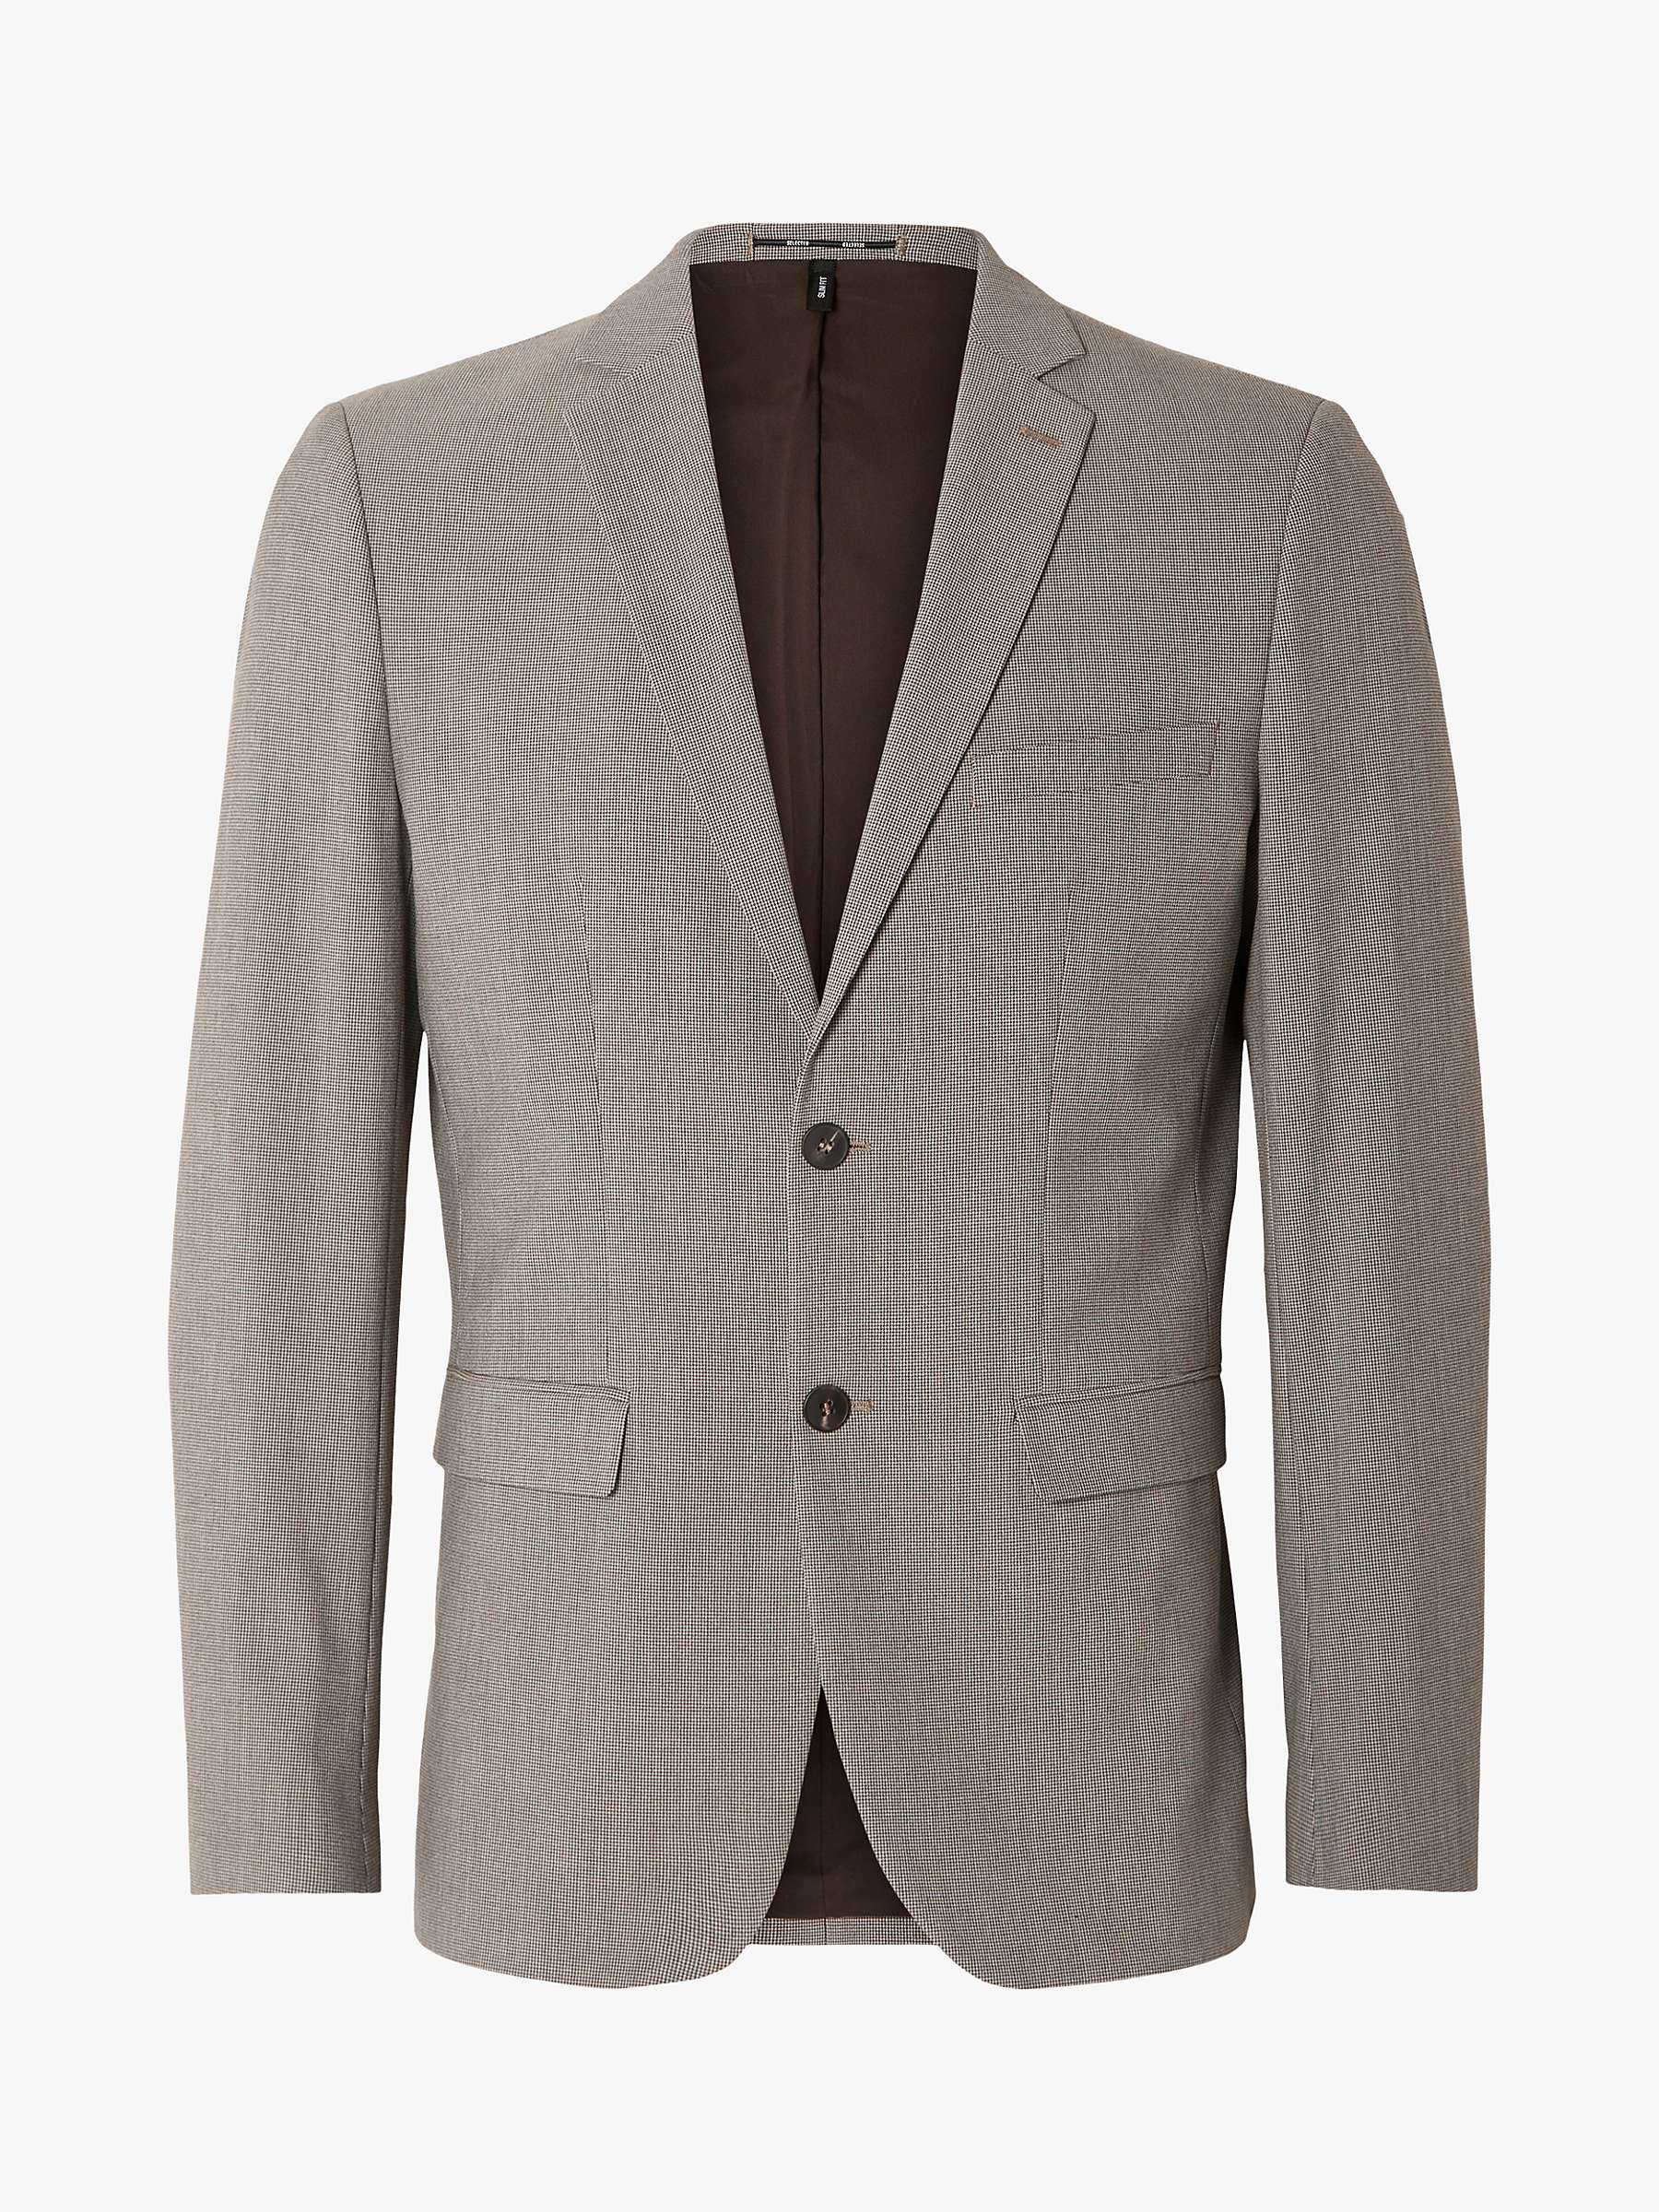 Buy SELECTED HOMME Tailored Fit Nordic Heritage Suit Jacket, Light Brown Online at johnlewis.com